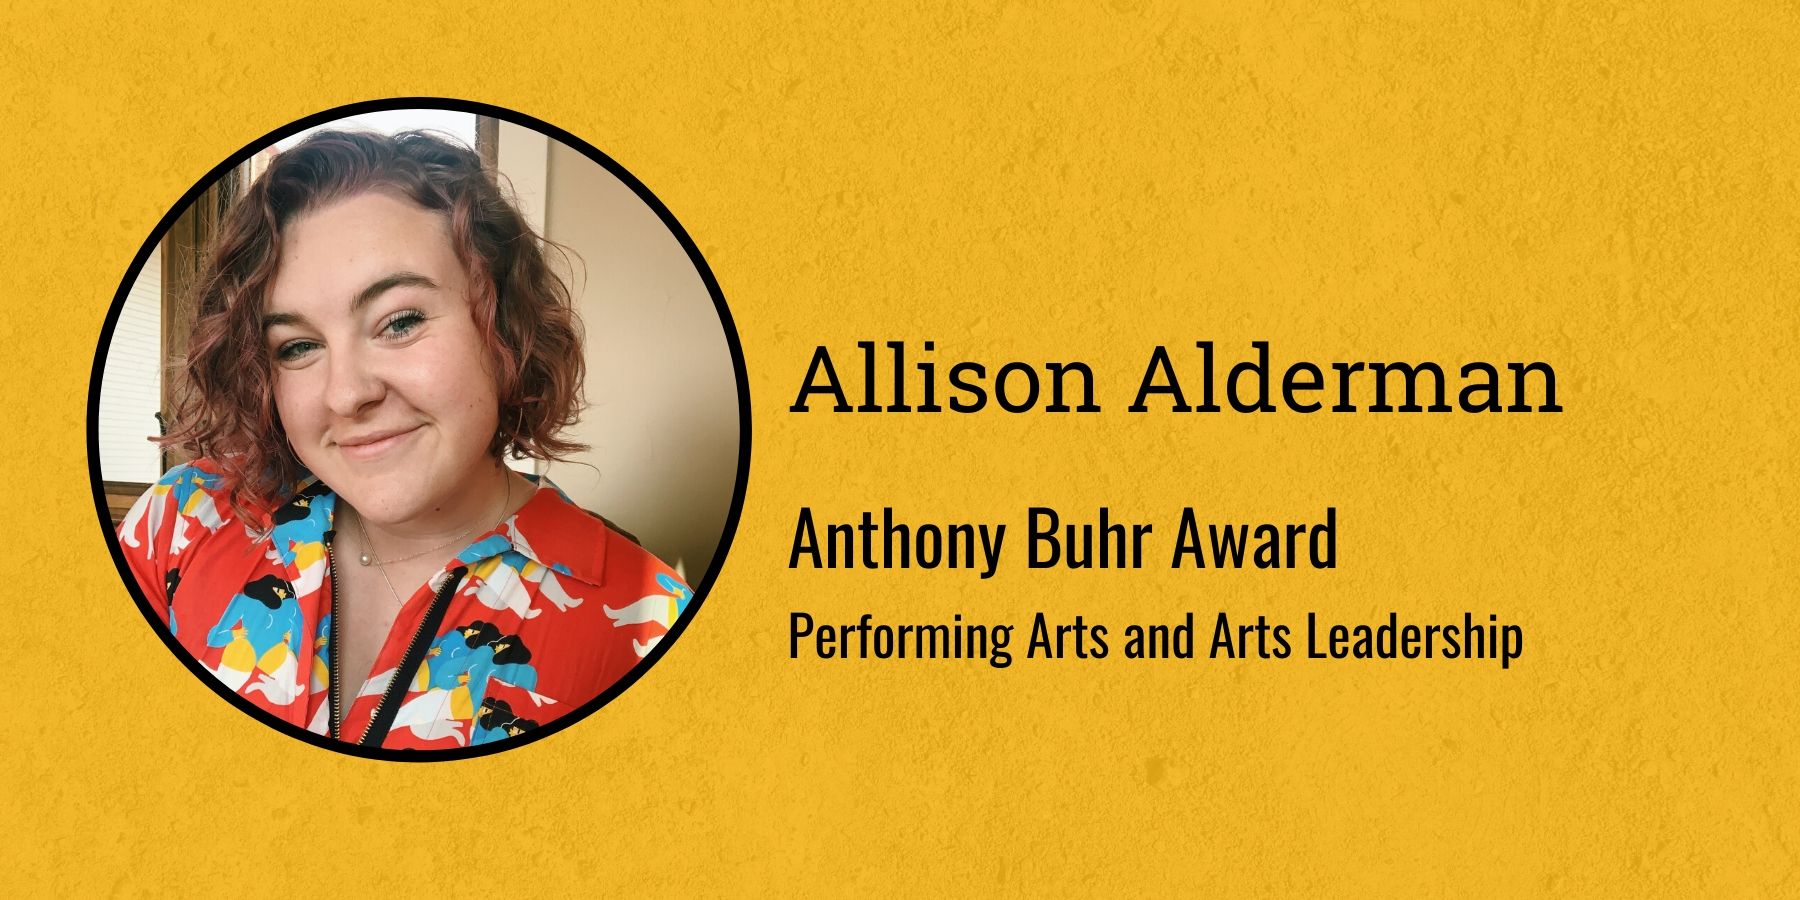 Photo of Allison Alderman and text Anthony Buhr Award, Performing Arts and Arts Leadership